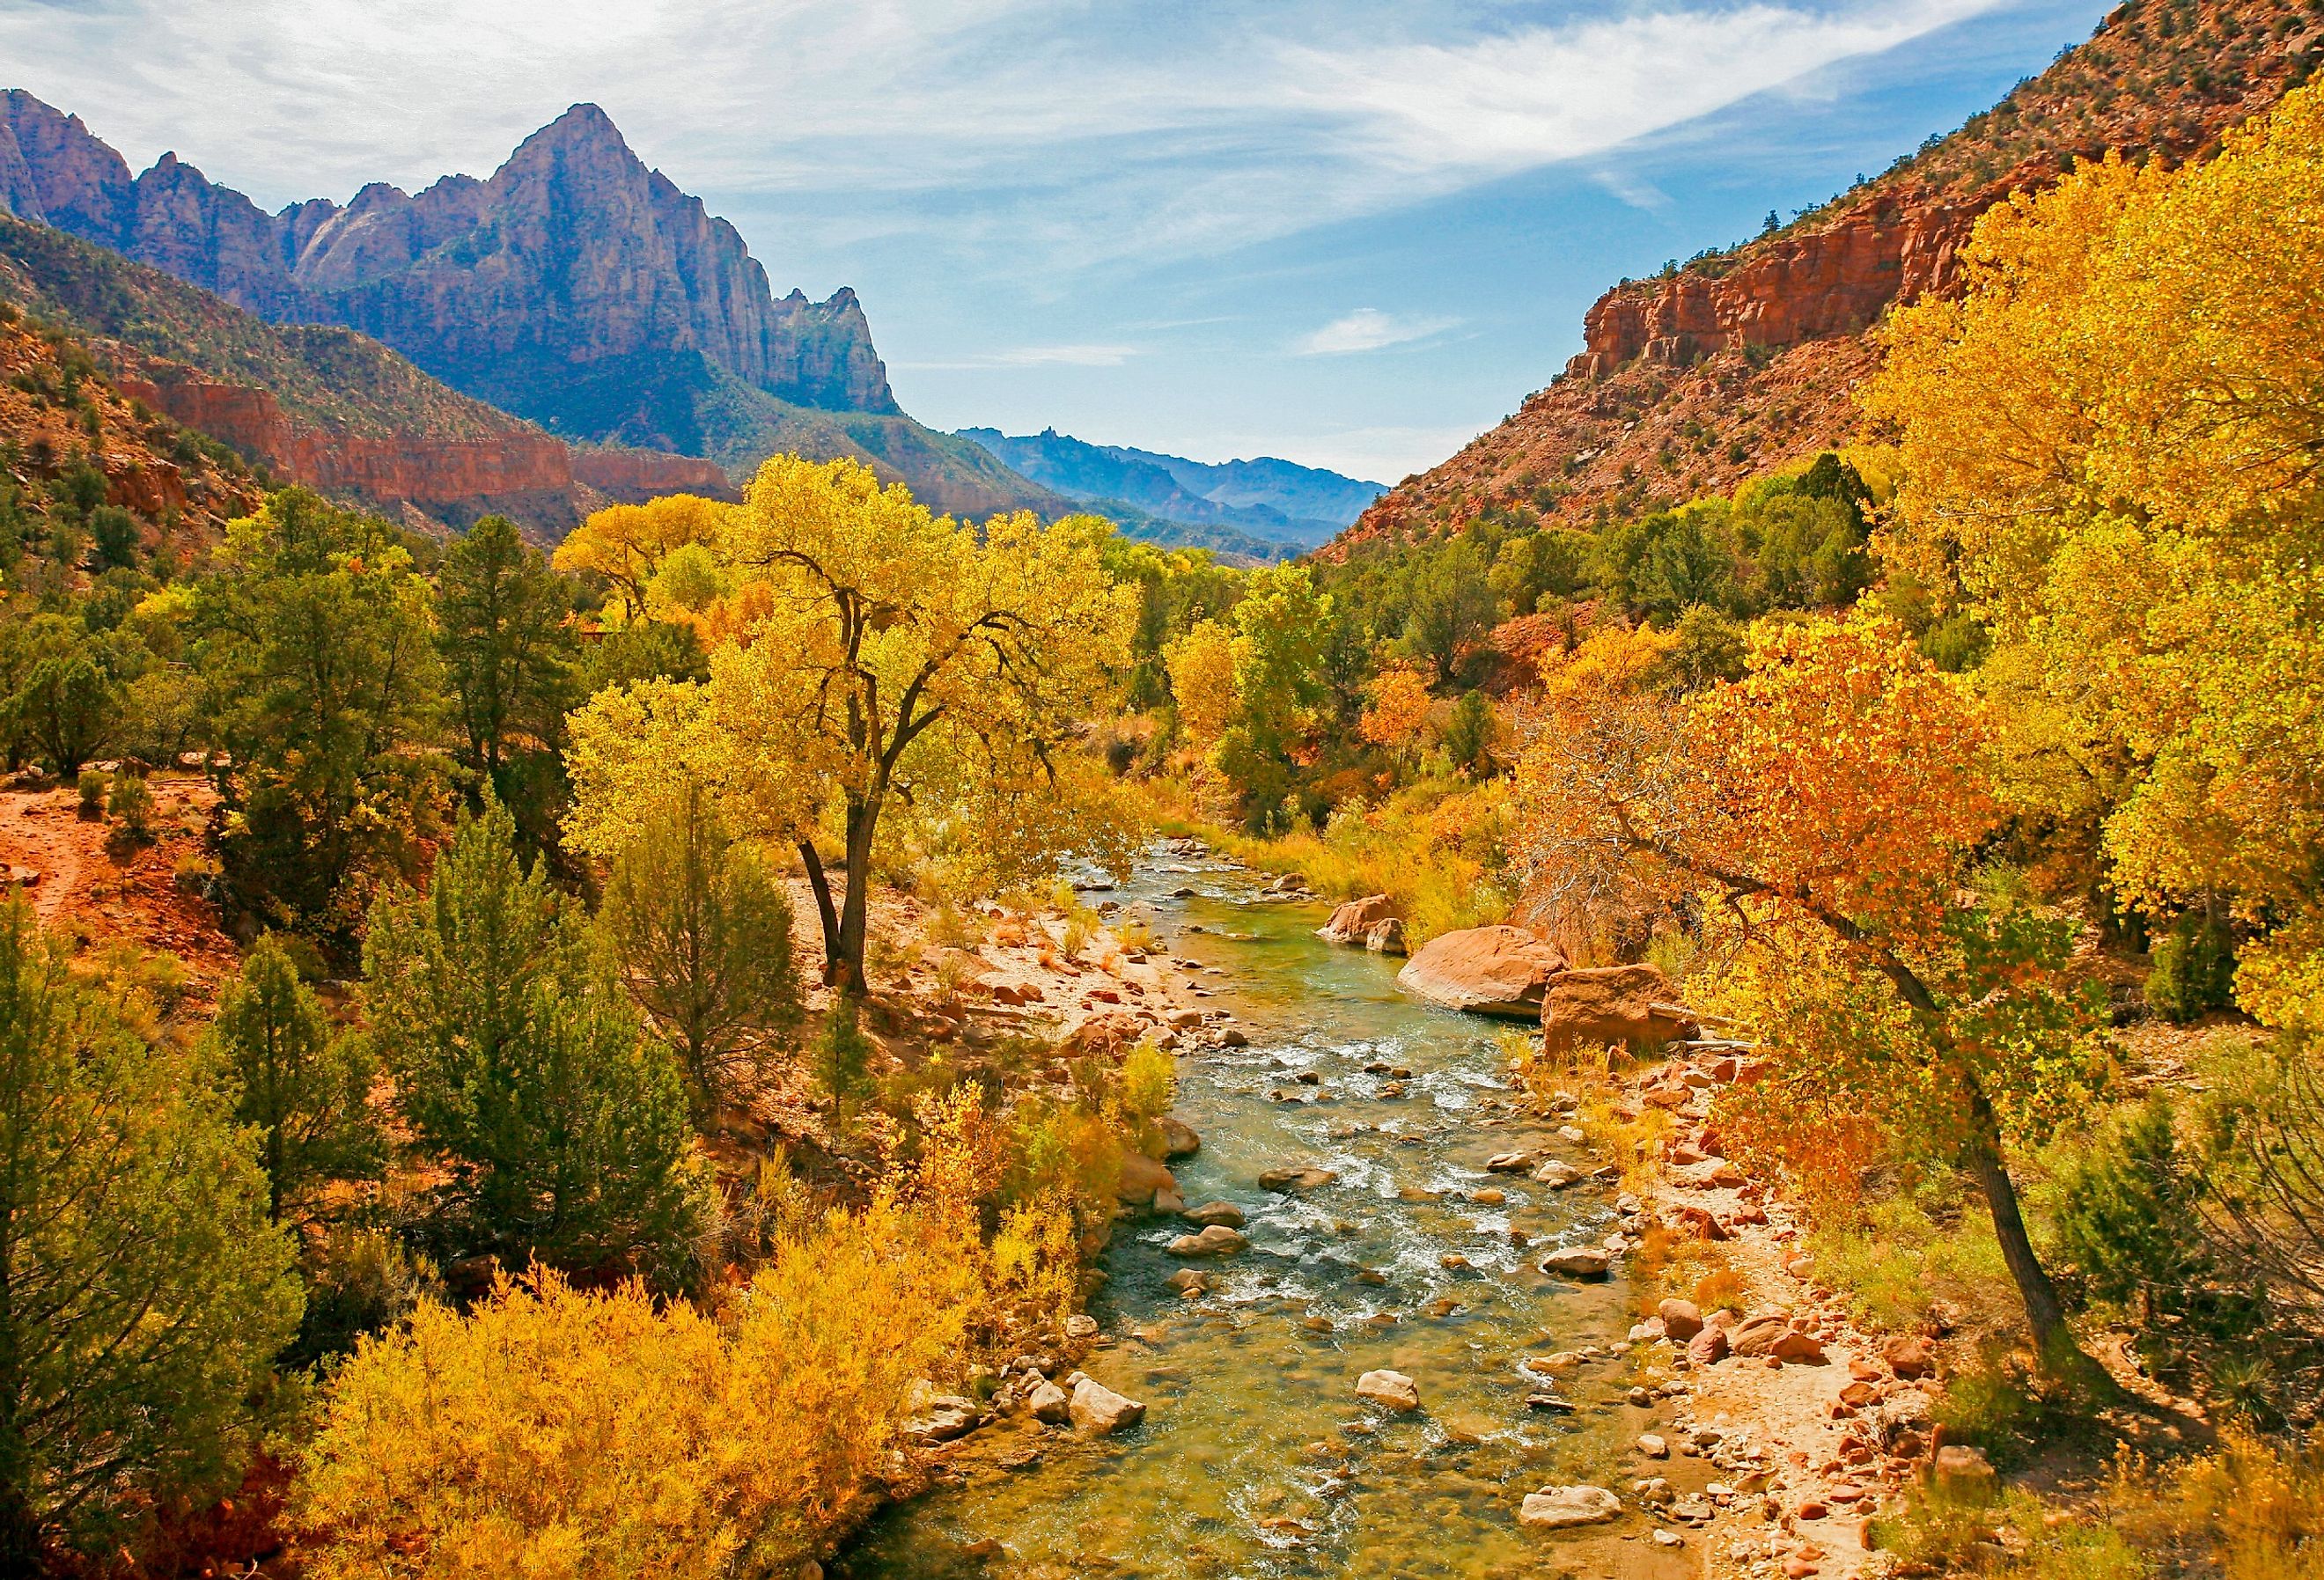 The Virgin River in Zion National Park, Utah during the fall season.